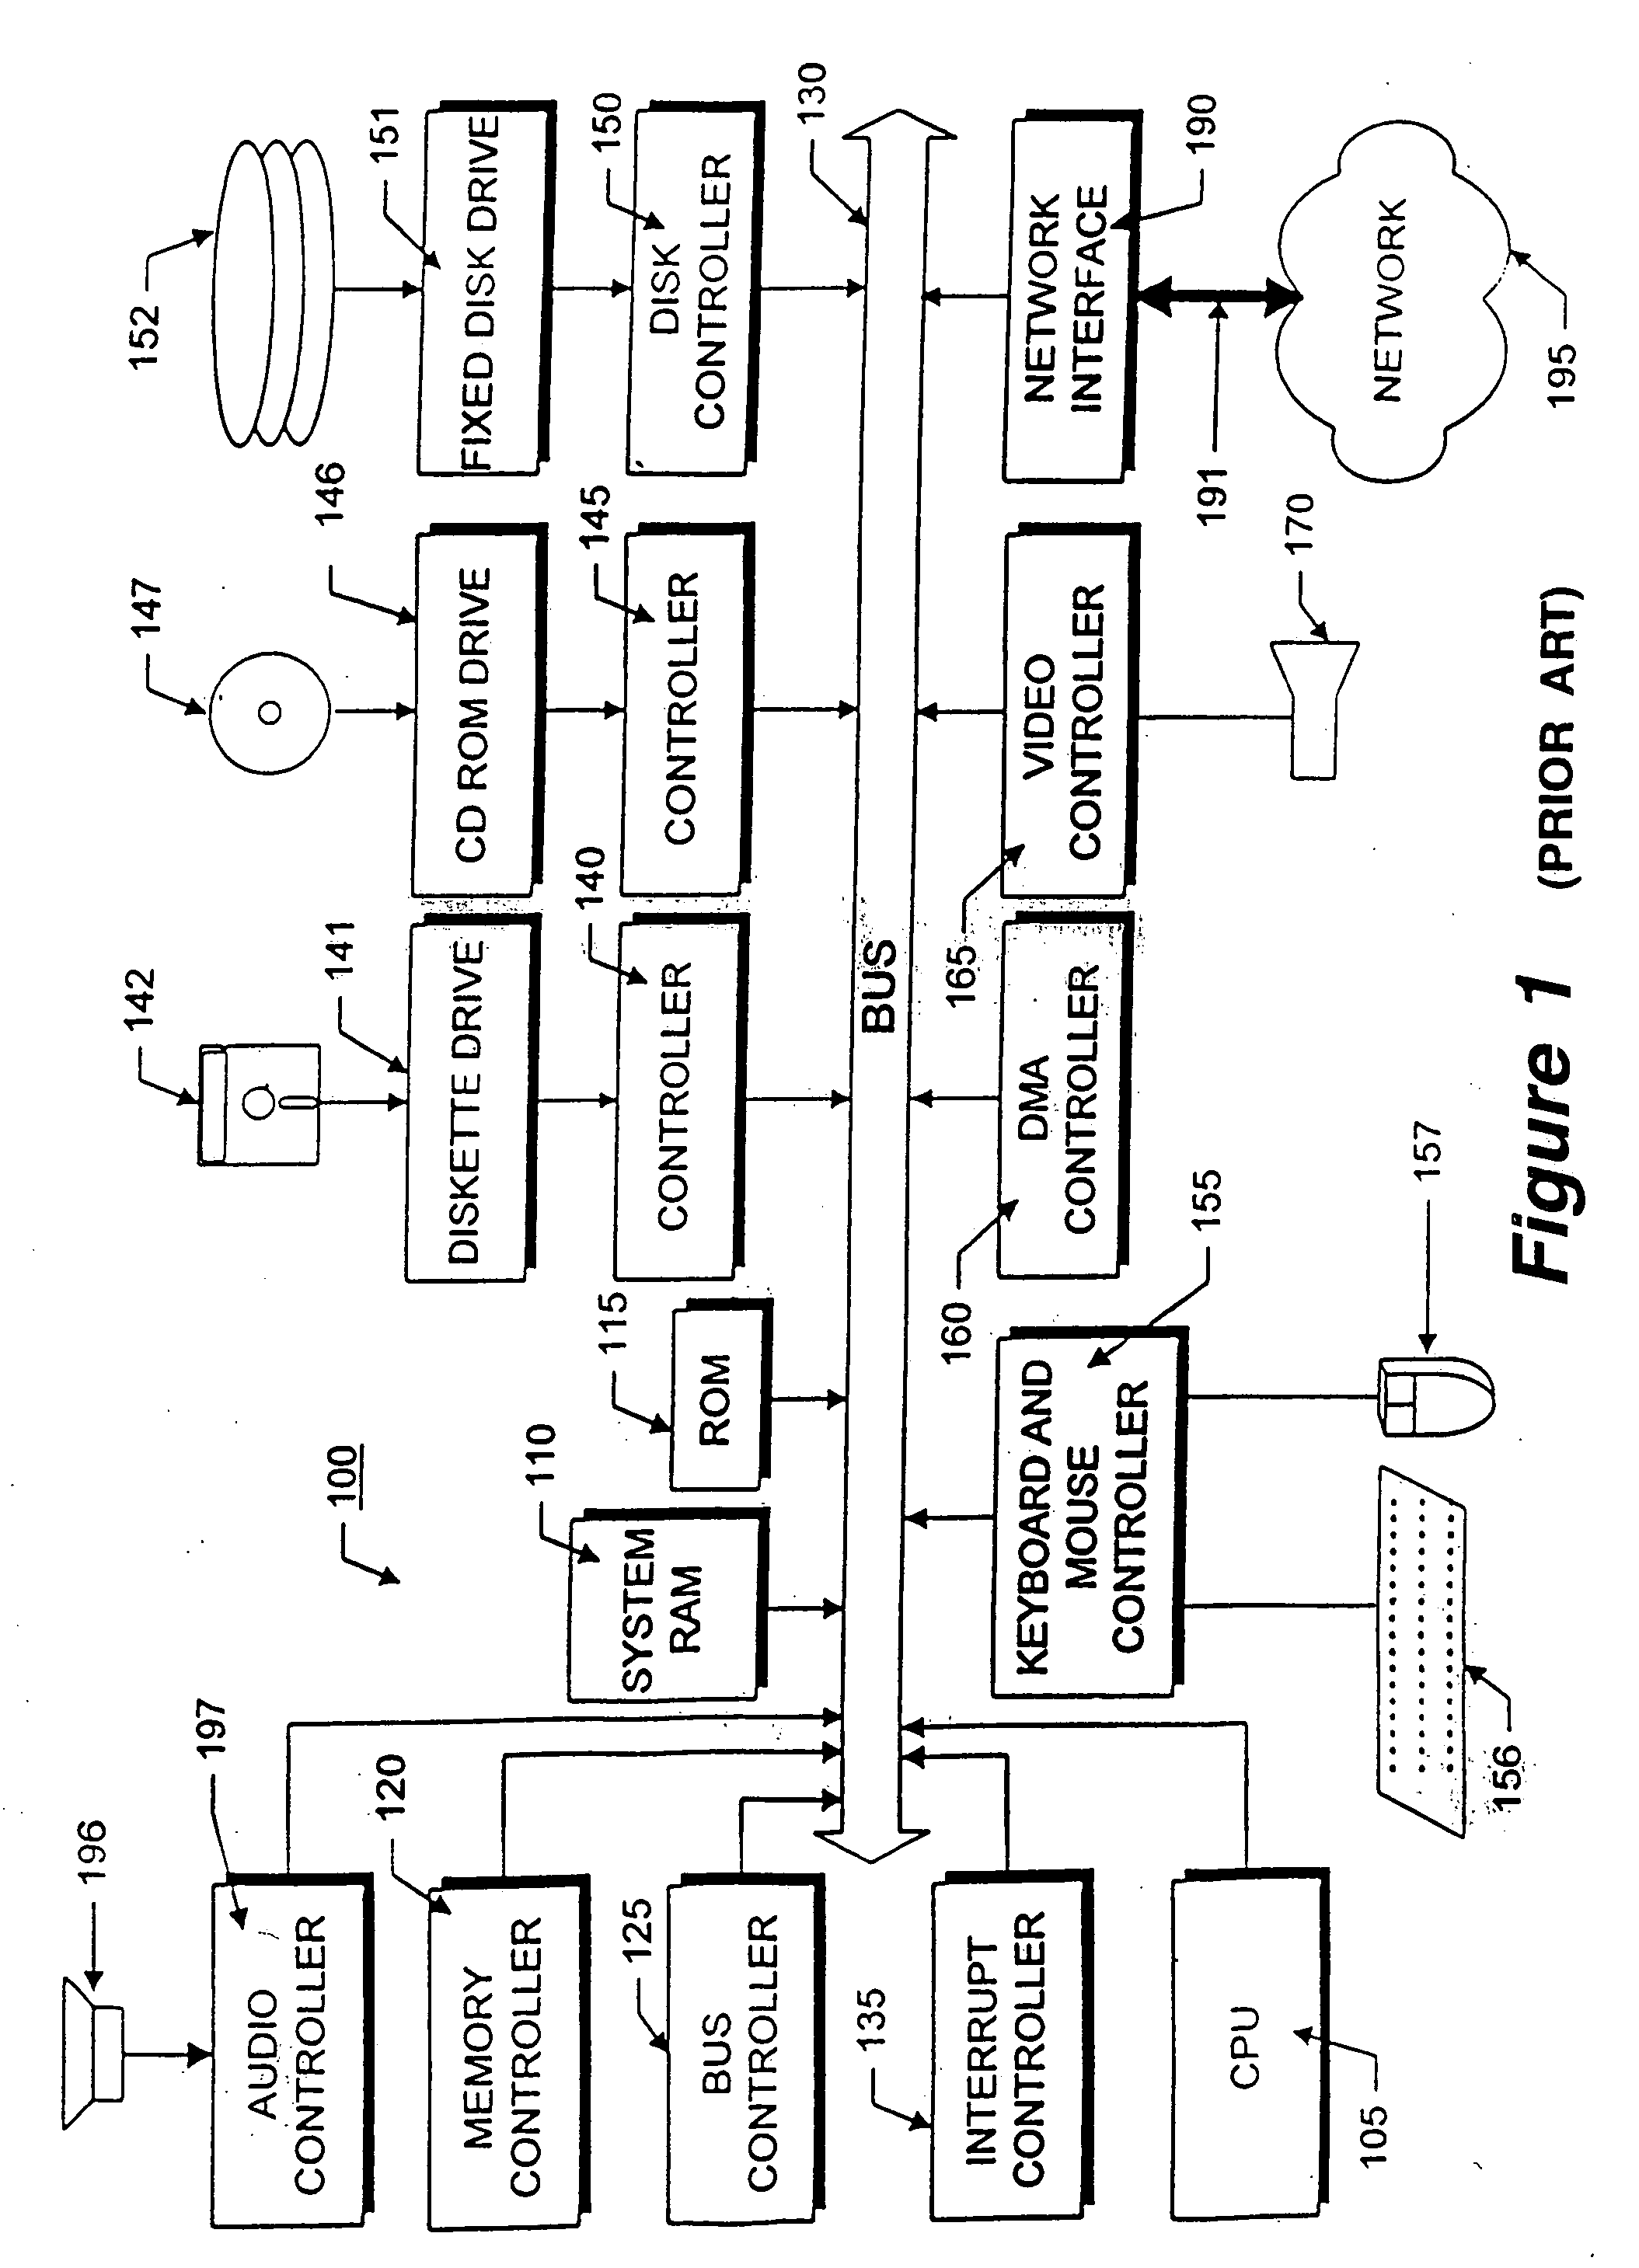 Method and apparatus for content protection in a secure content delivery system